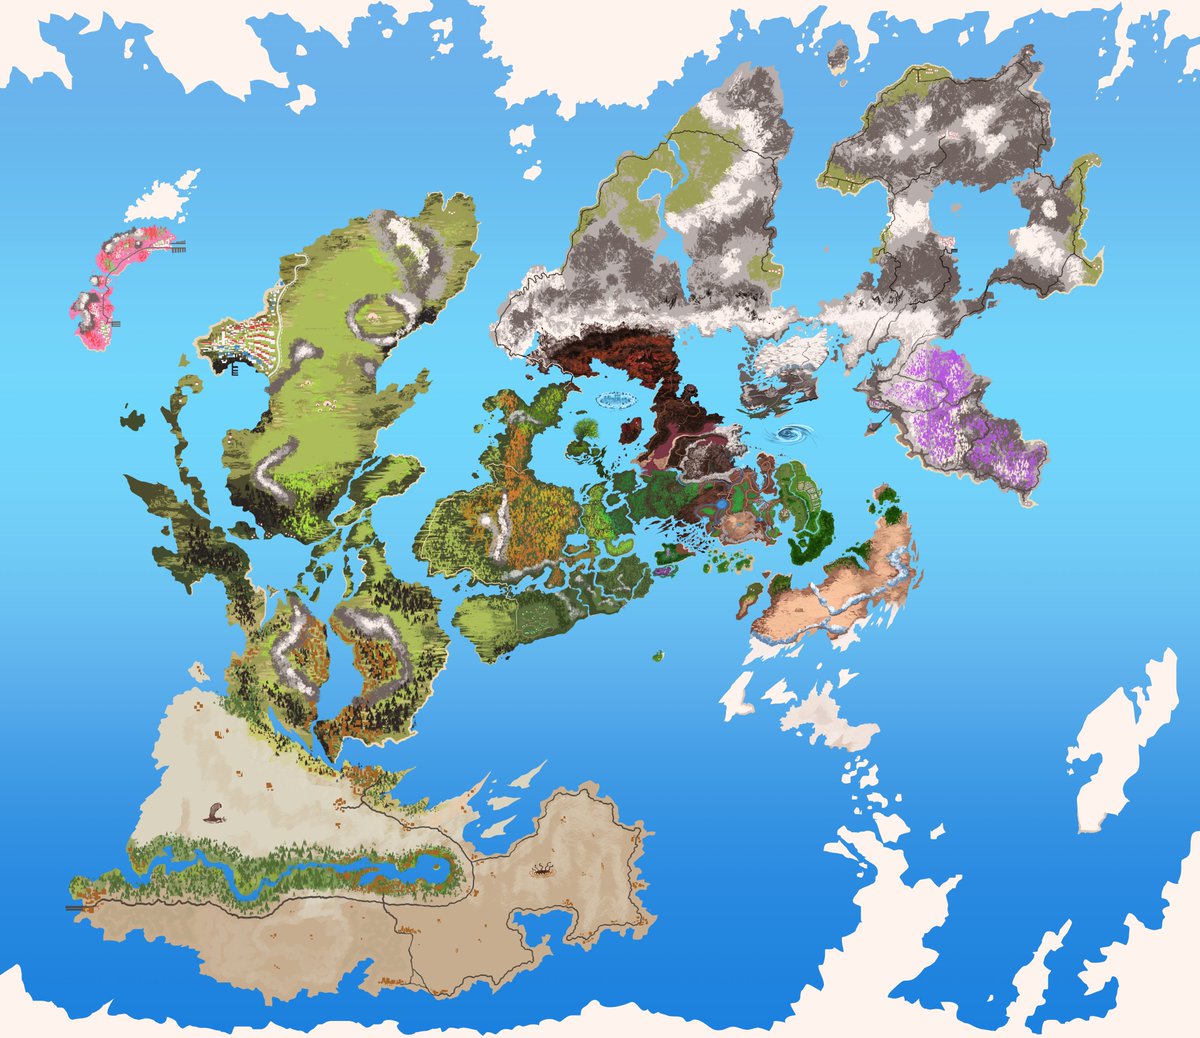 「D&D world map that I made for fun in bet」|advarcherのイラスト